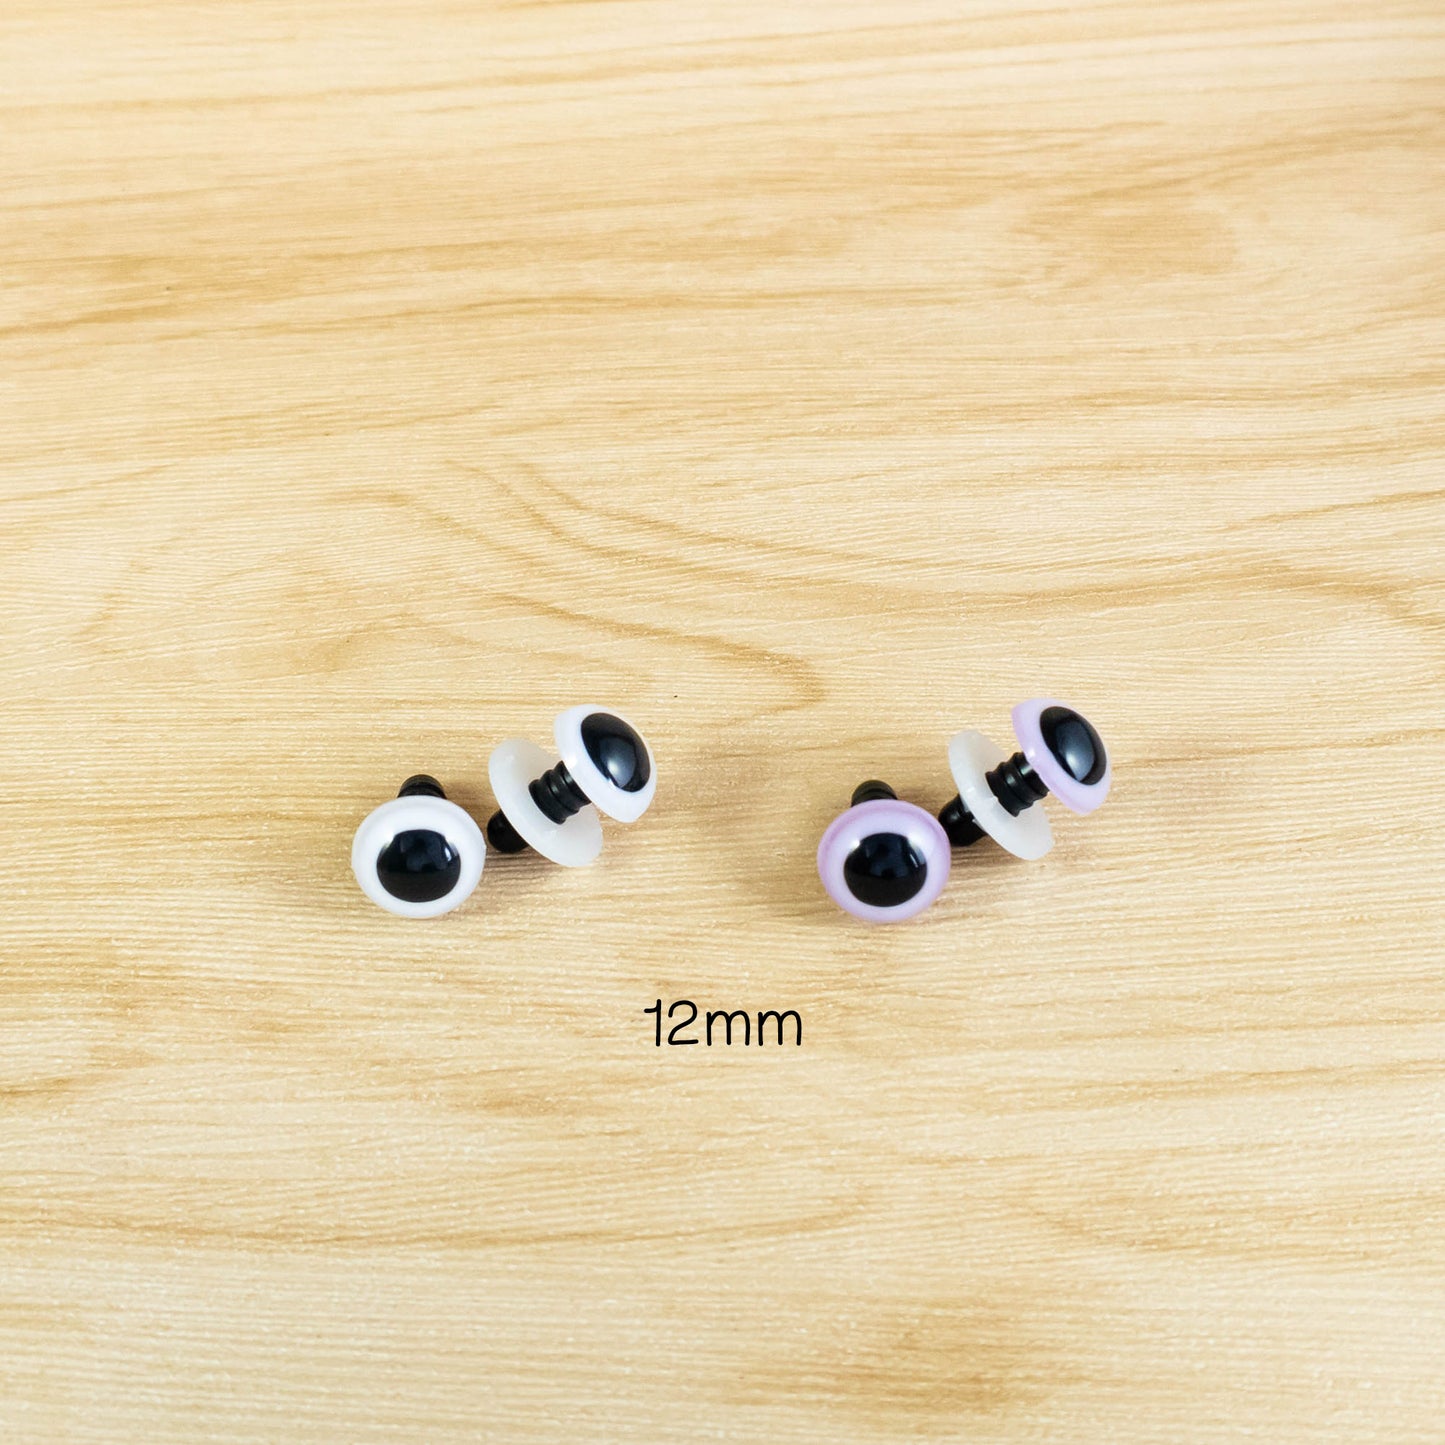 12mm white toy eyes and 12mm purple toy eyes for teddy bears